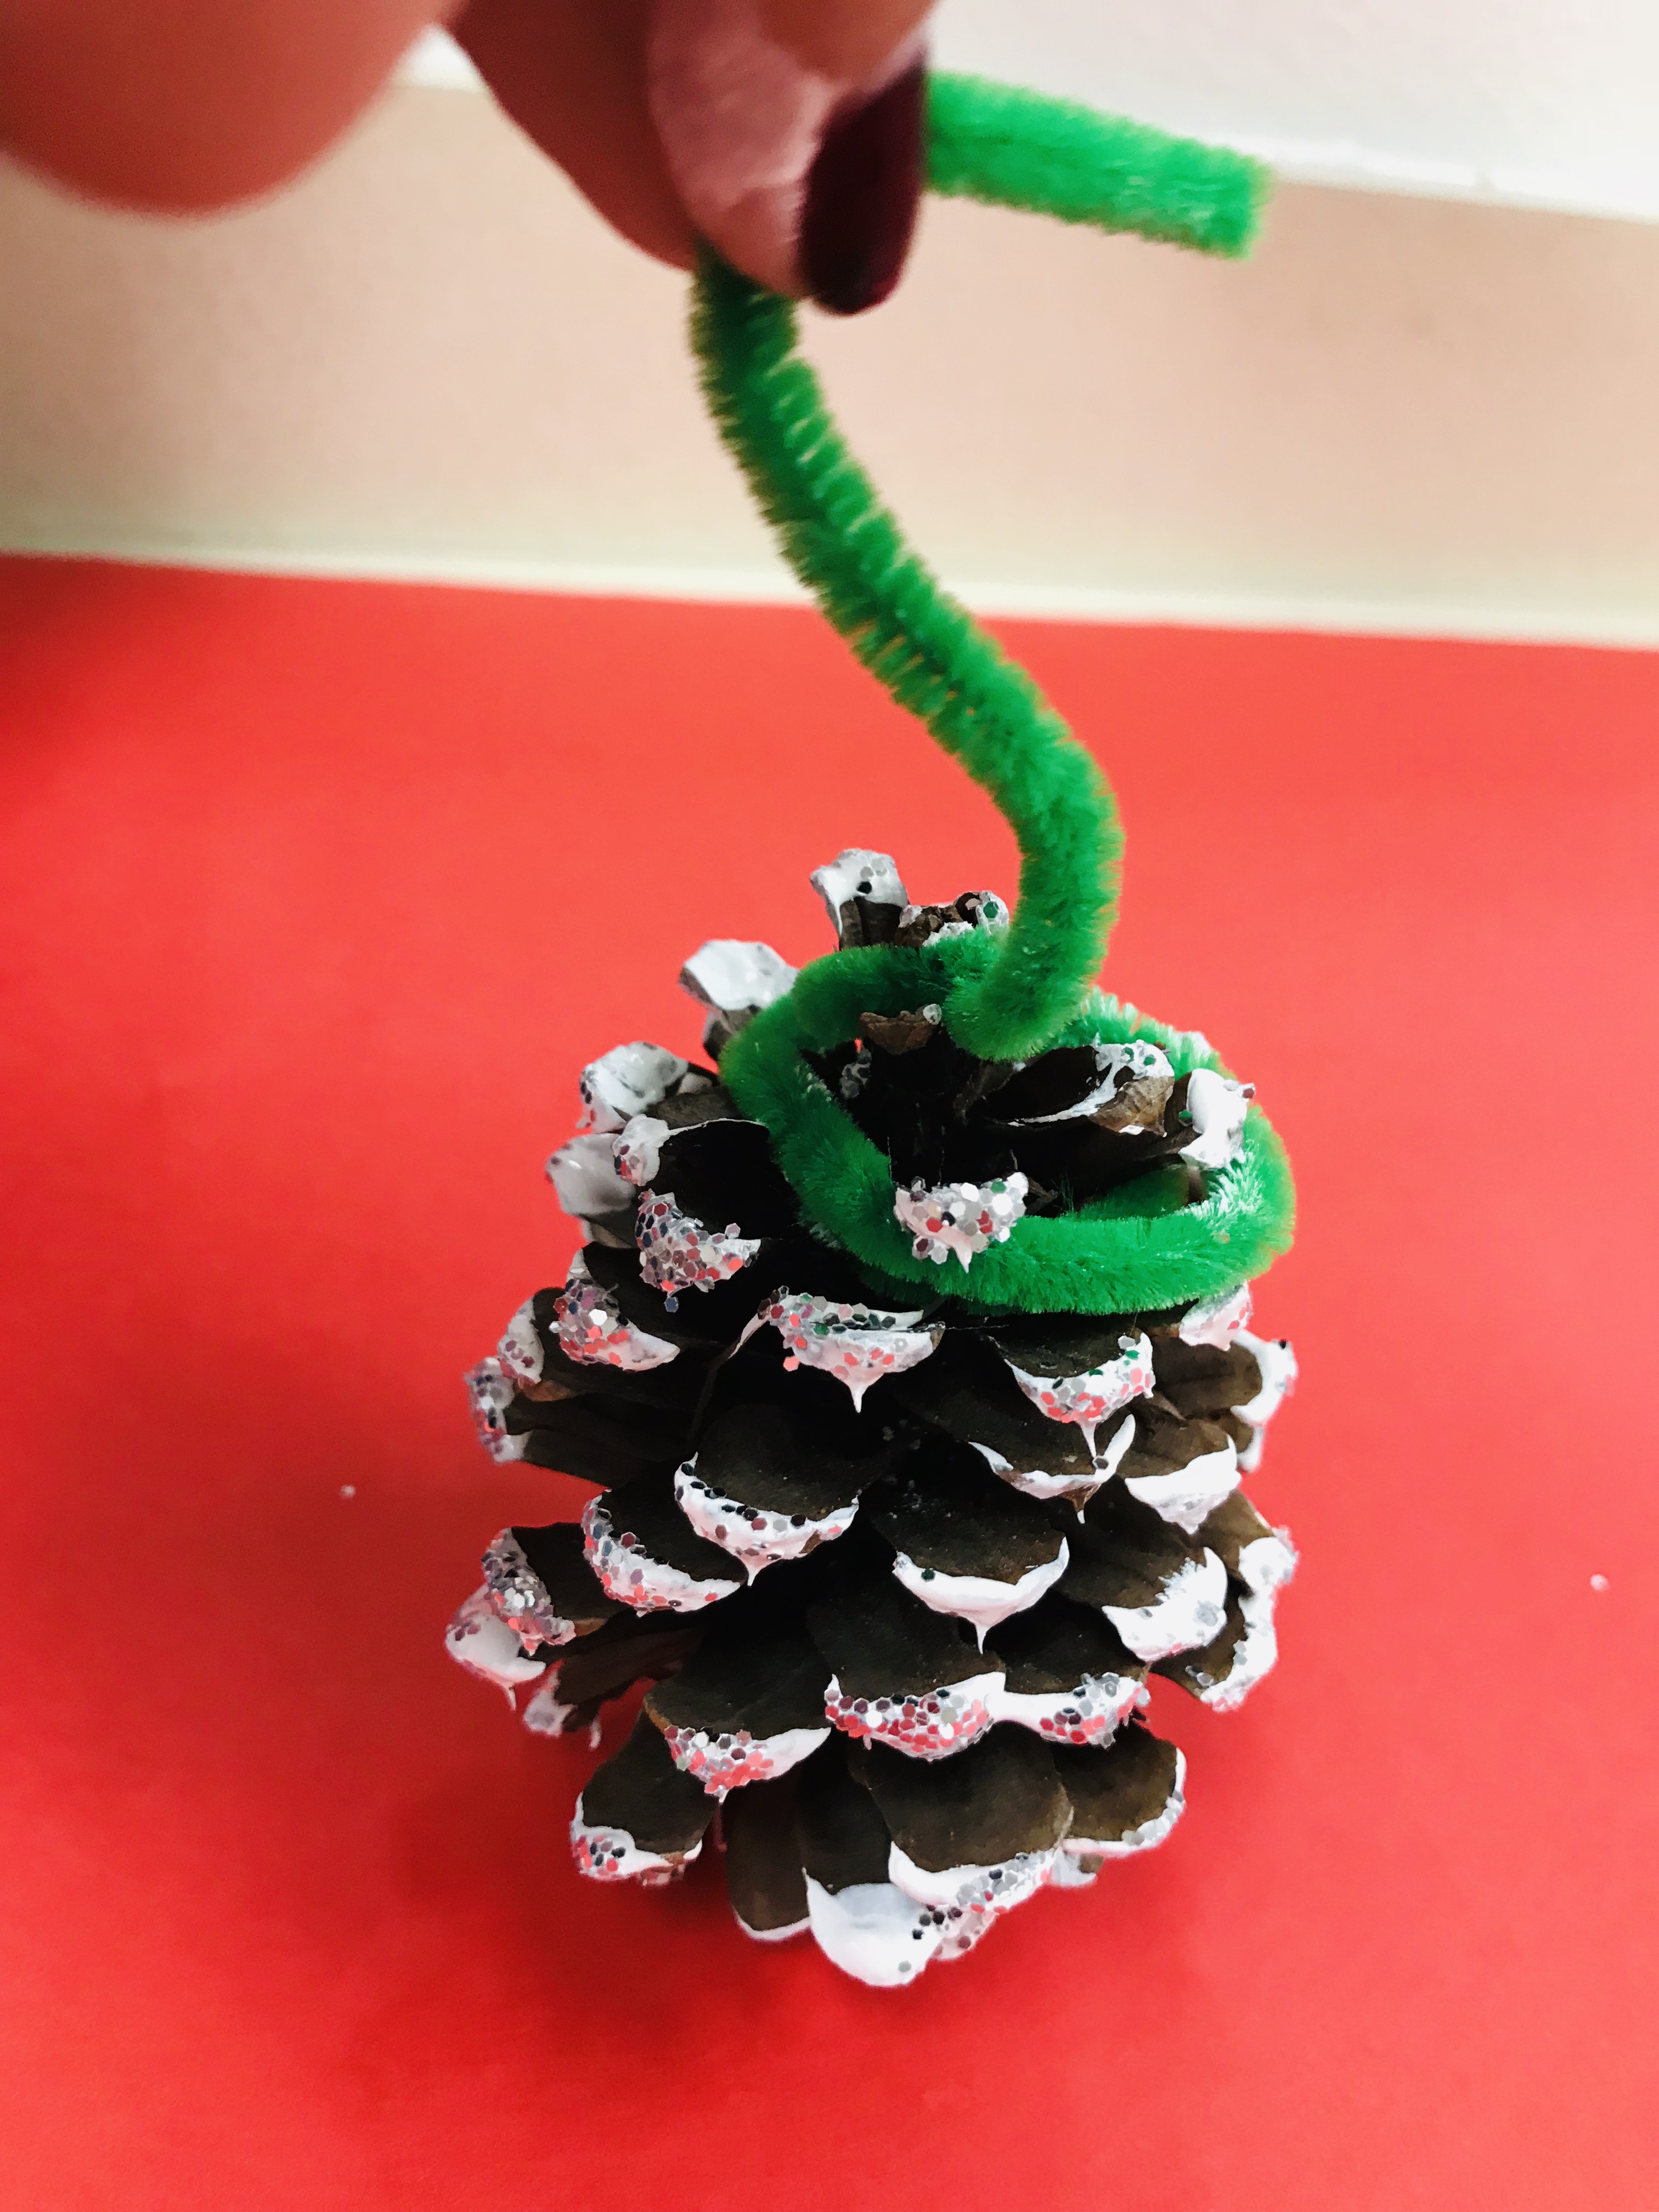 Glittered pine cones on green pipe cleaner stems